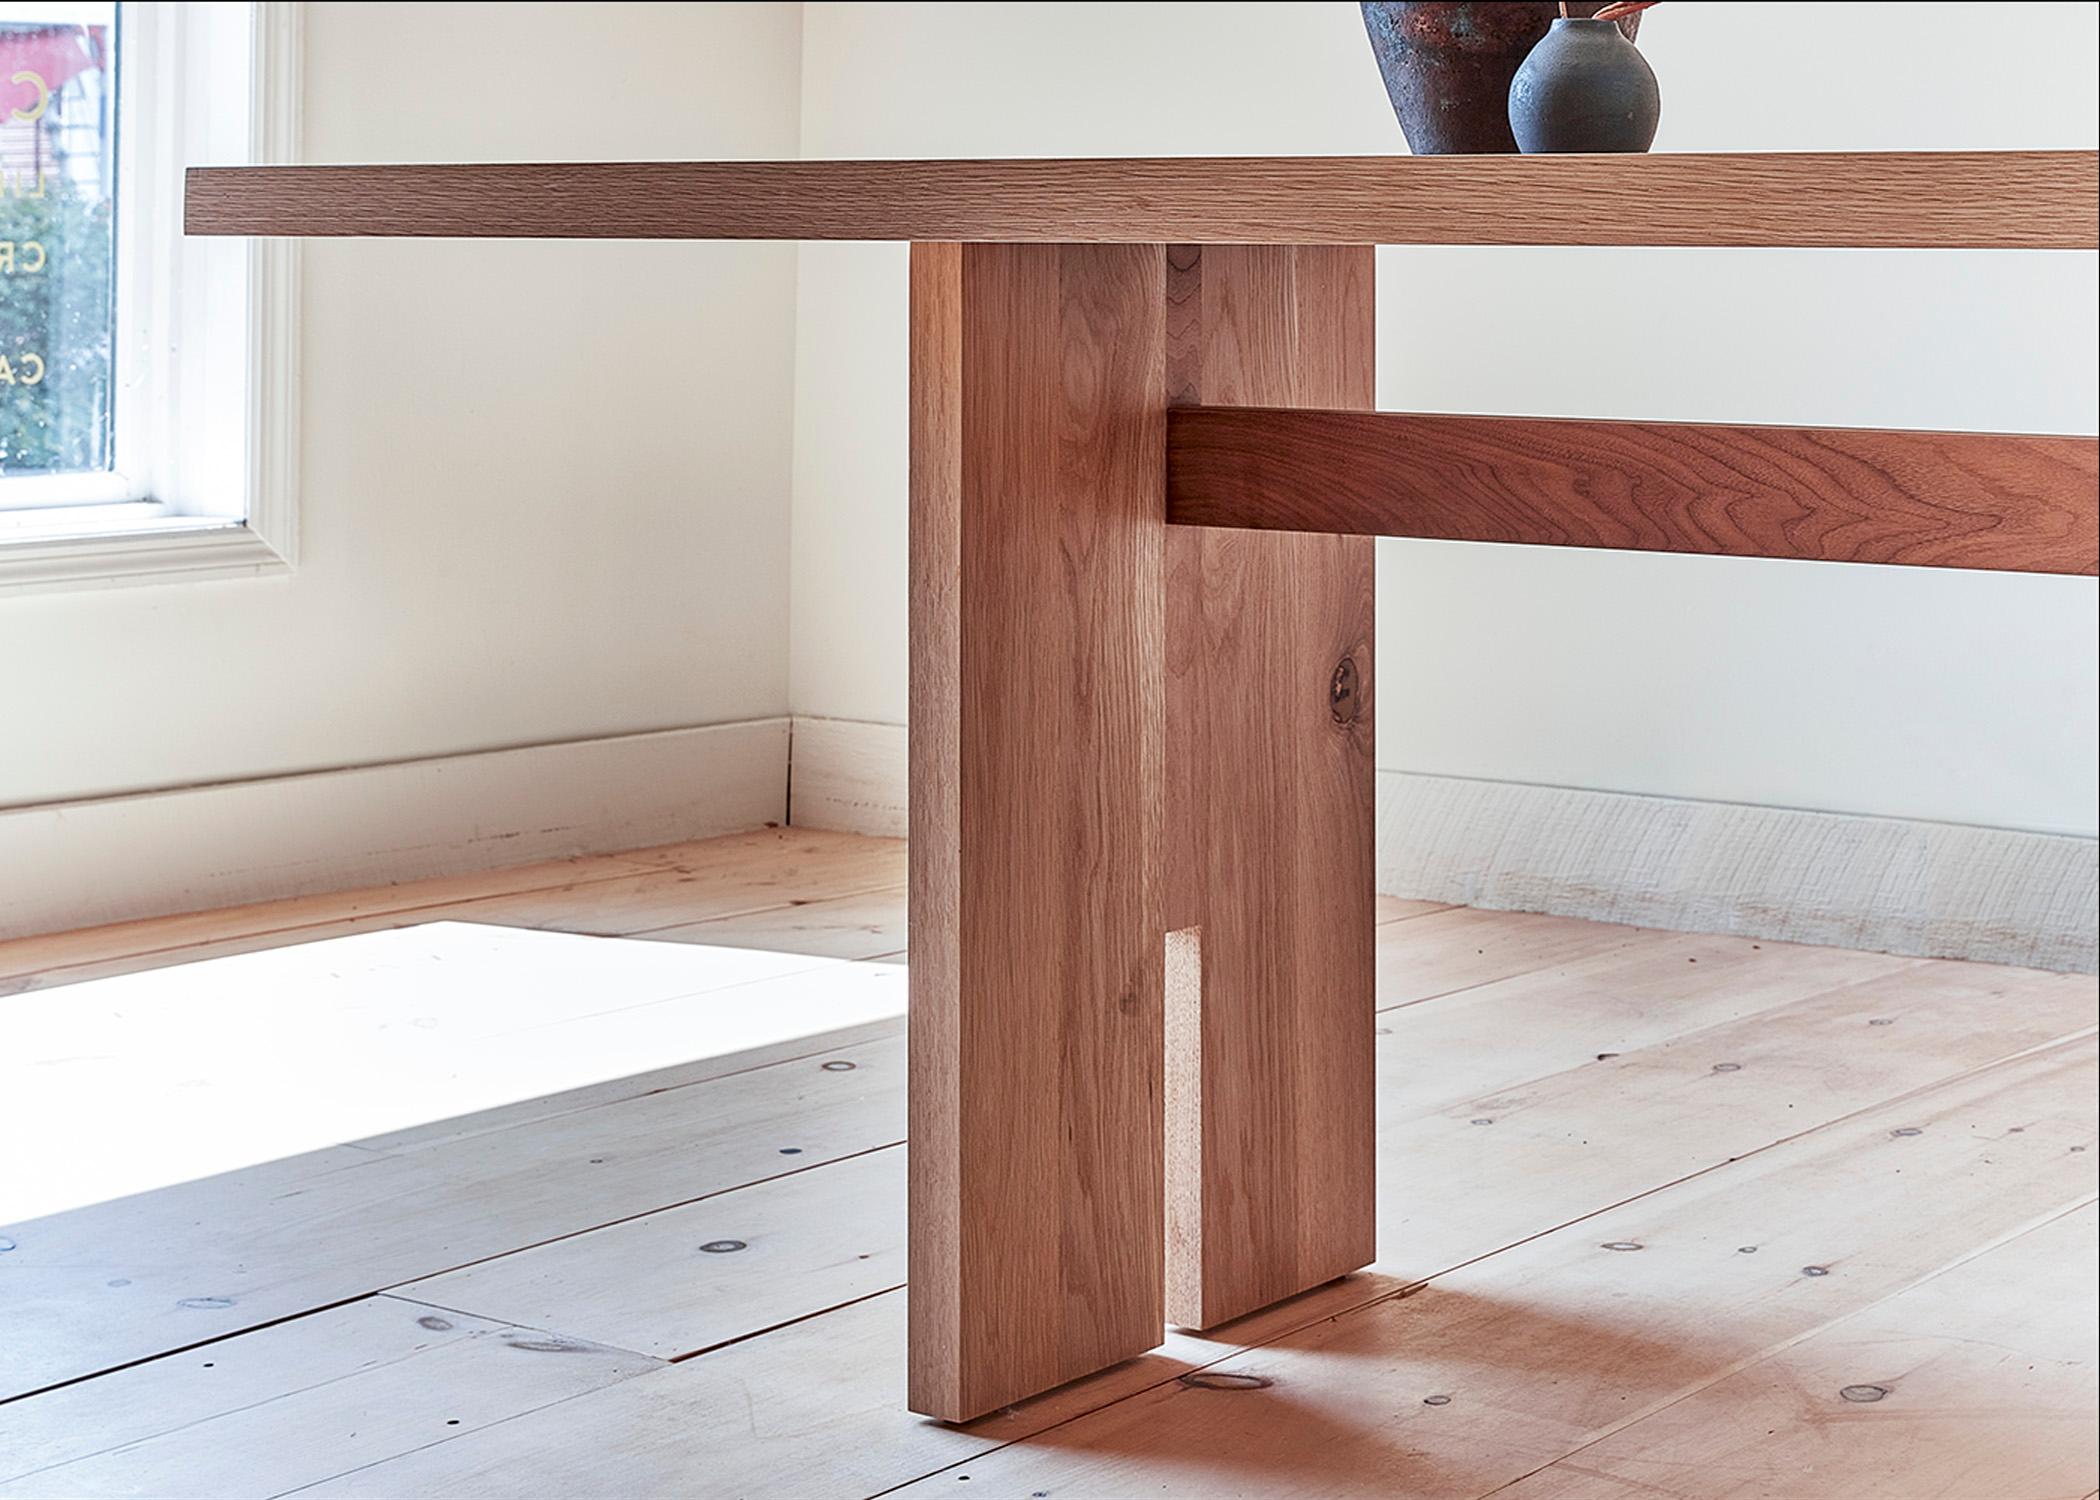 This custom dining table is hand-made in the United States with all hardwood construction. It features a modern table design with a solid white oak body and a minimalist walnut inlay detail and stretcher. Naturally occurring knots are celebrated,